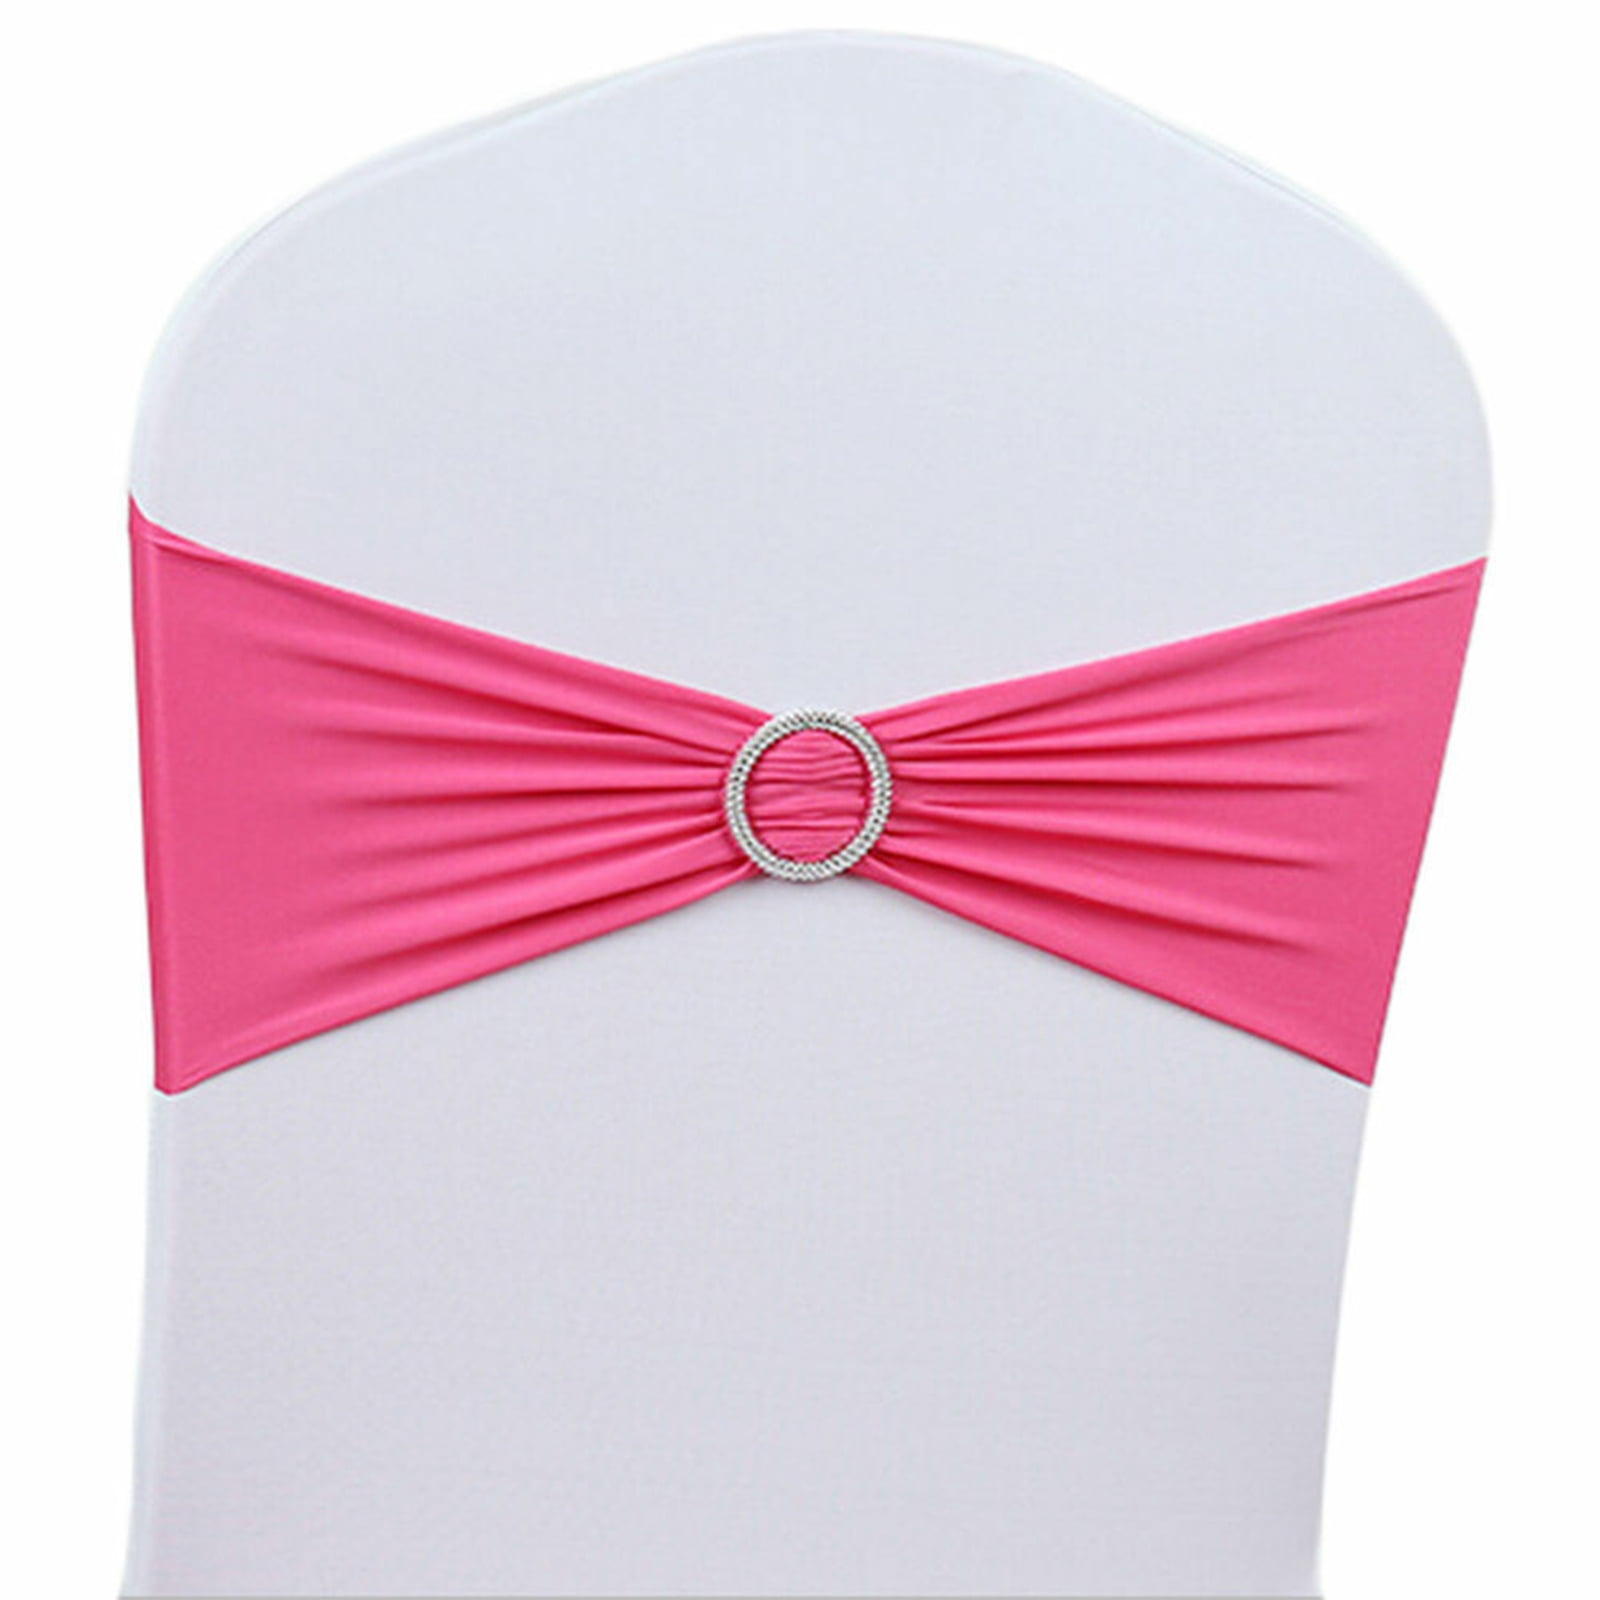 100PCS Spandex Stretch Wedding Chair Cover Sashes Bow Band Party Banquet Decor 